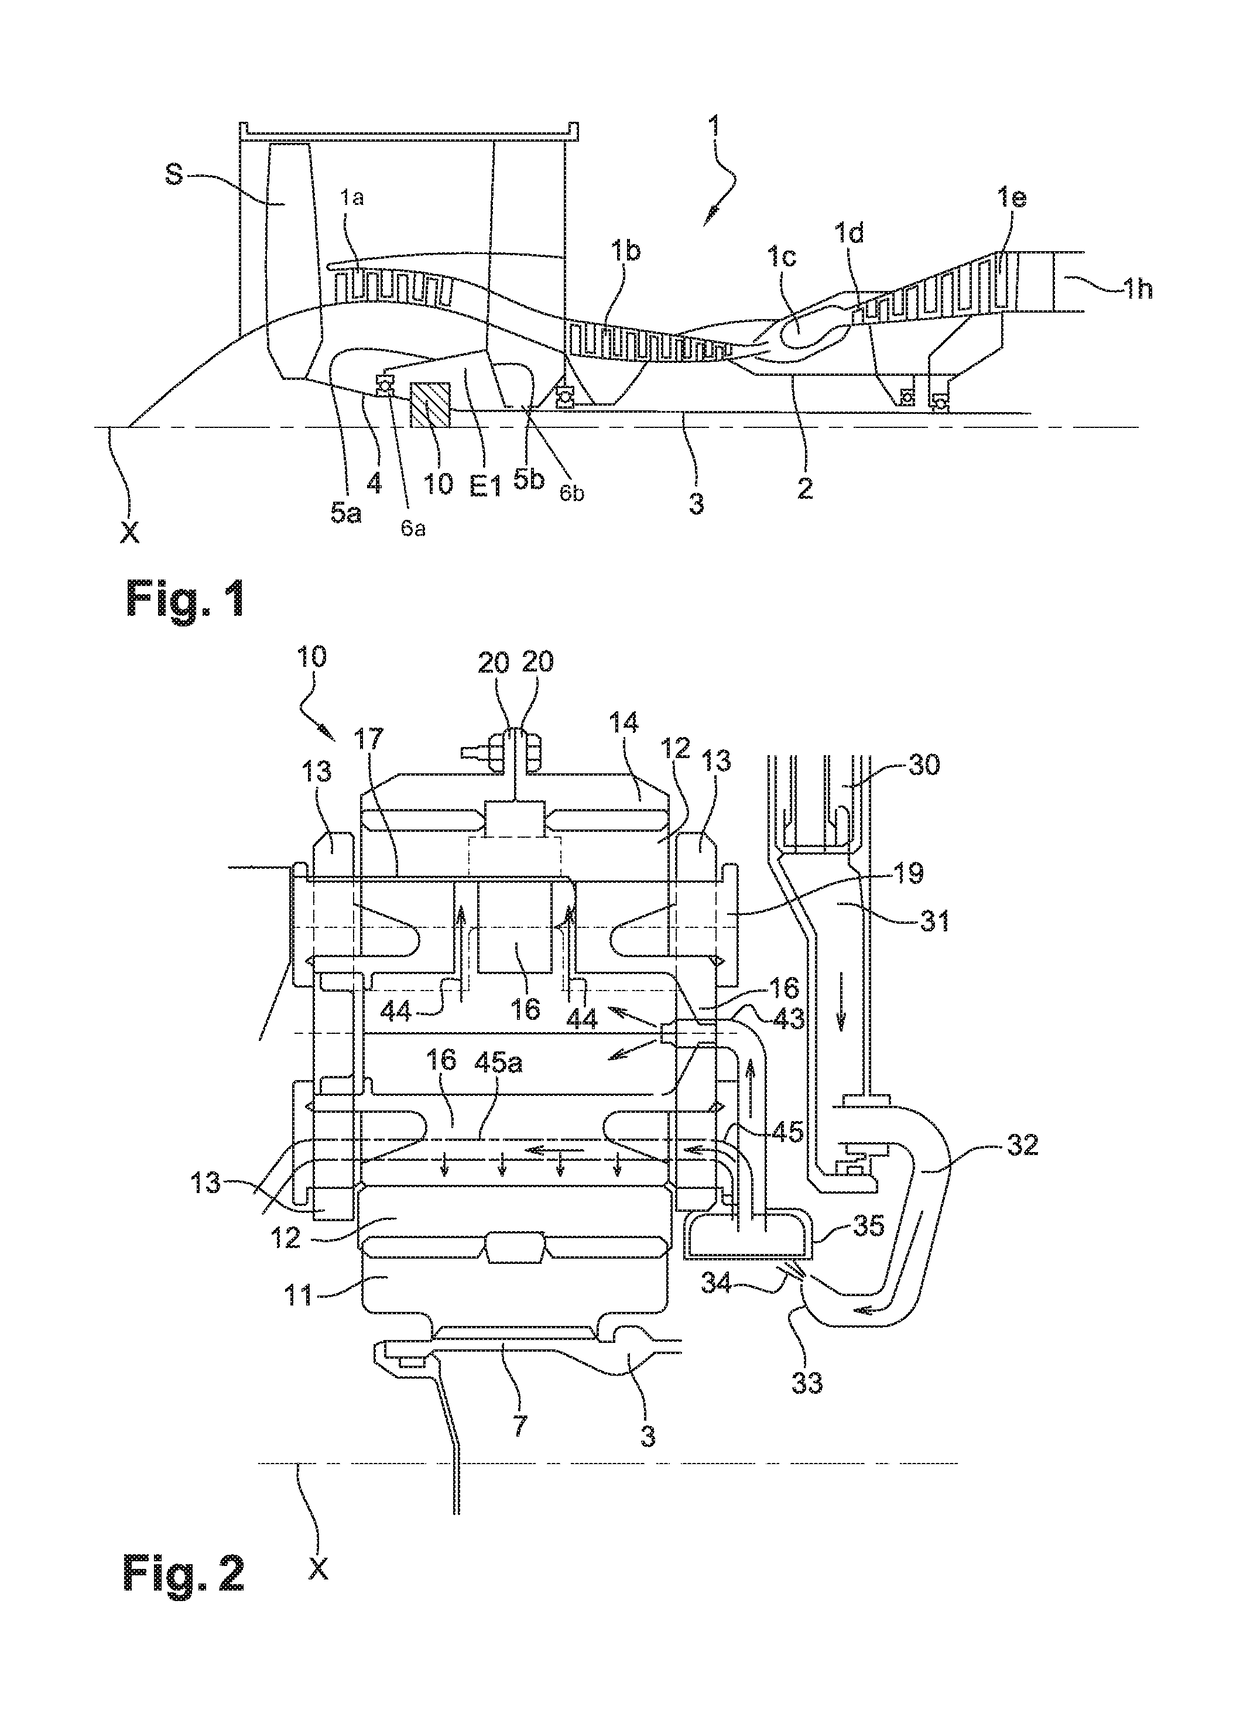 Oil supply device for an epicyclic reduction gear set